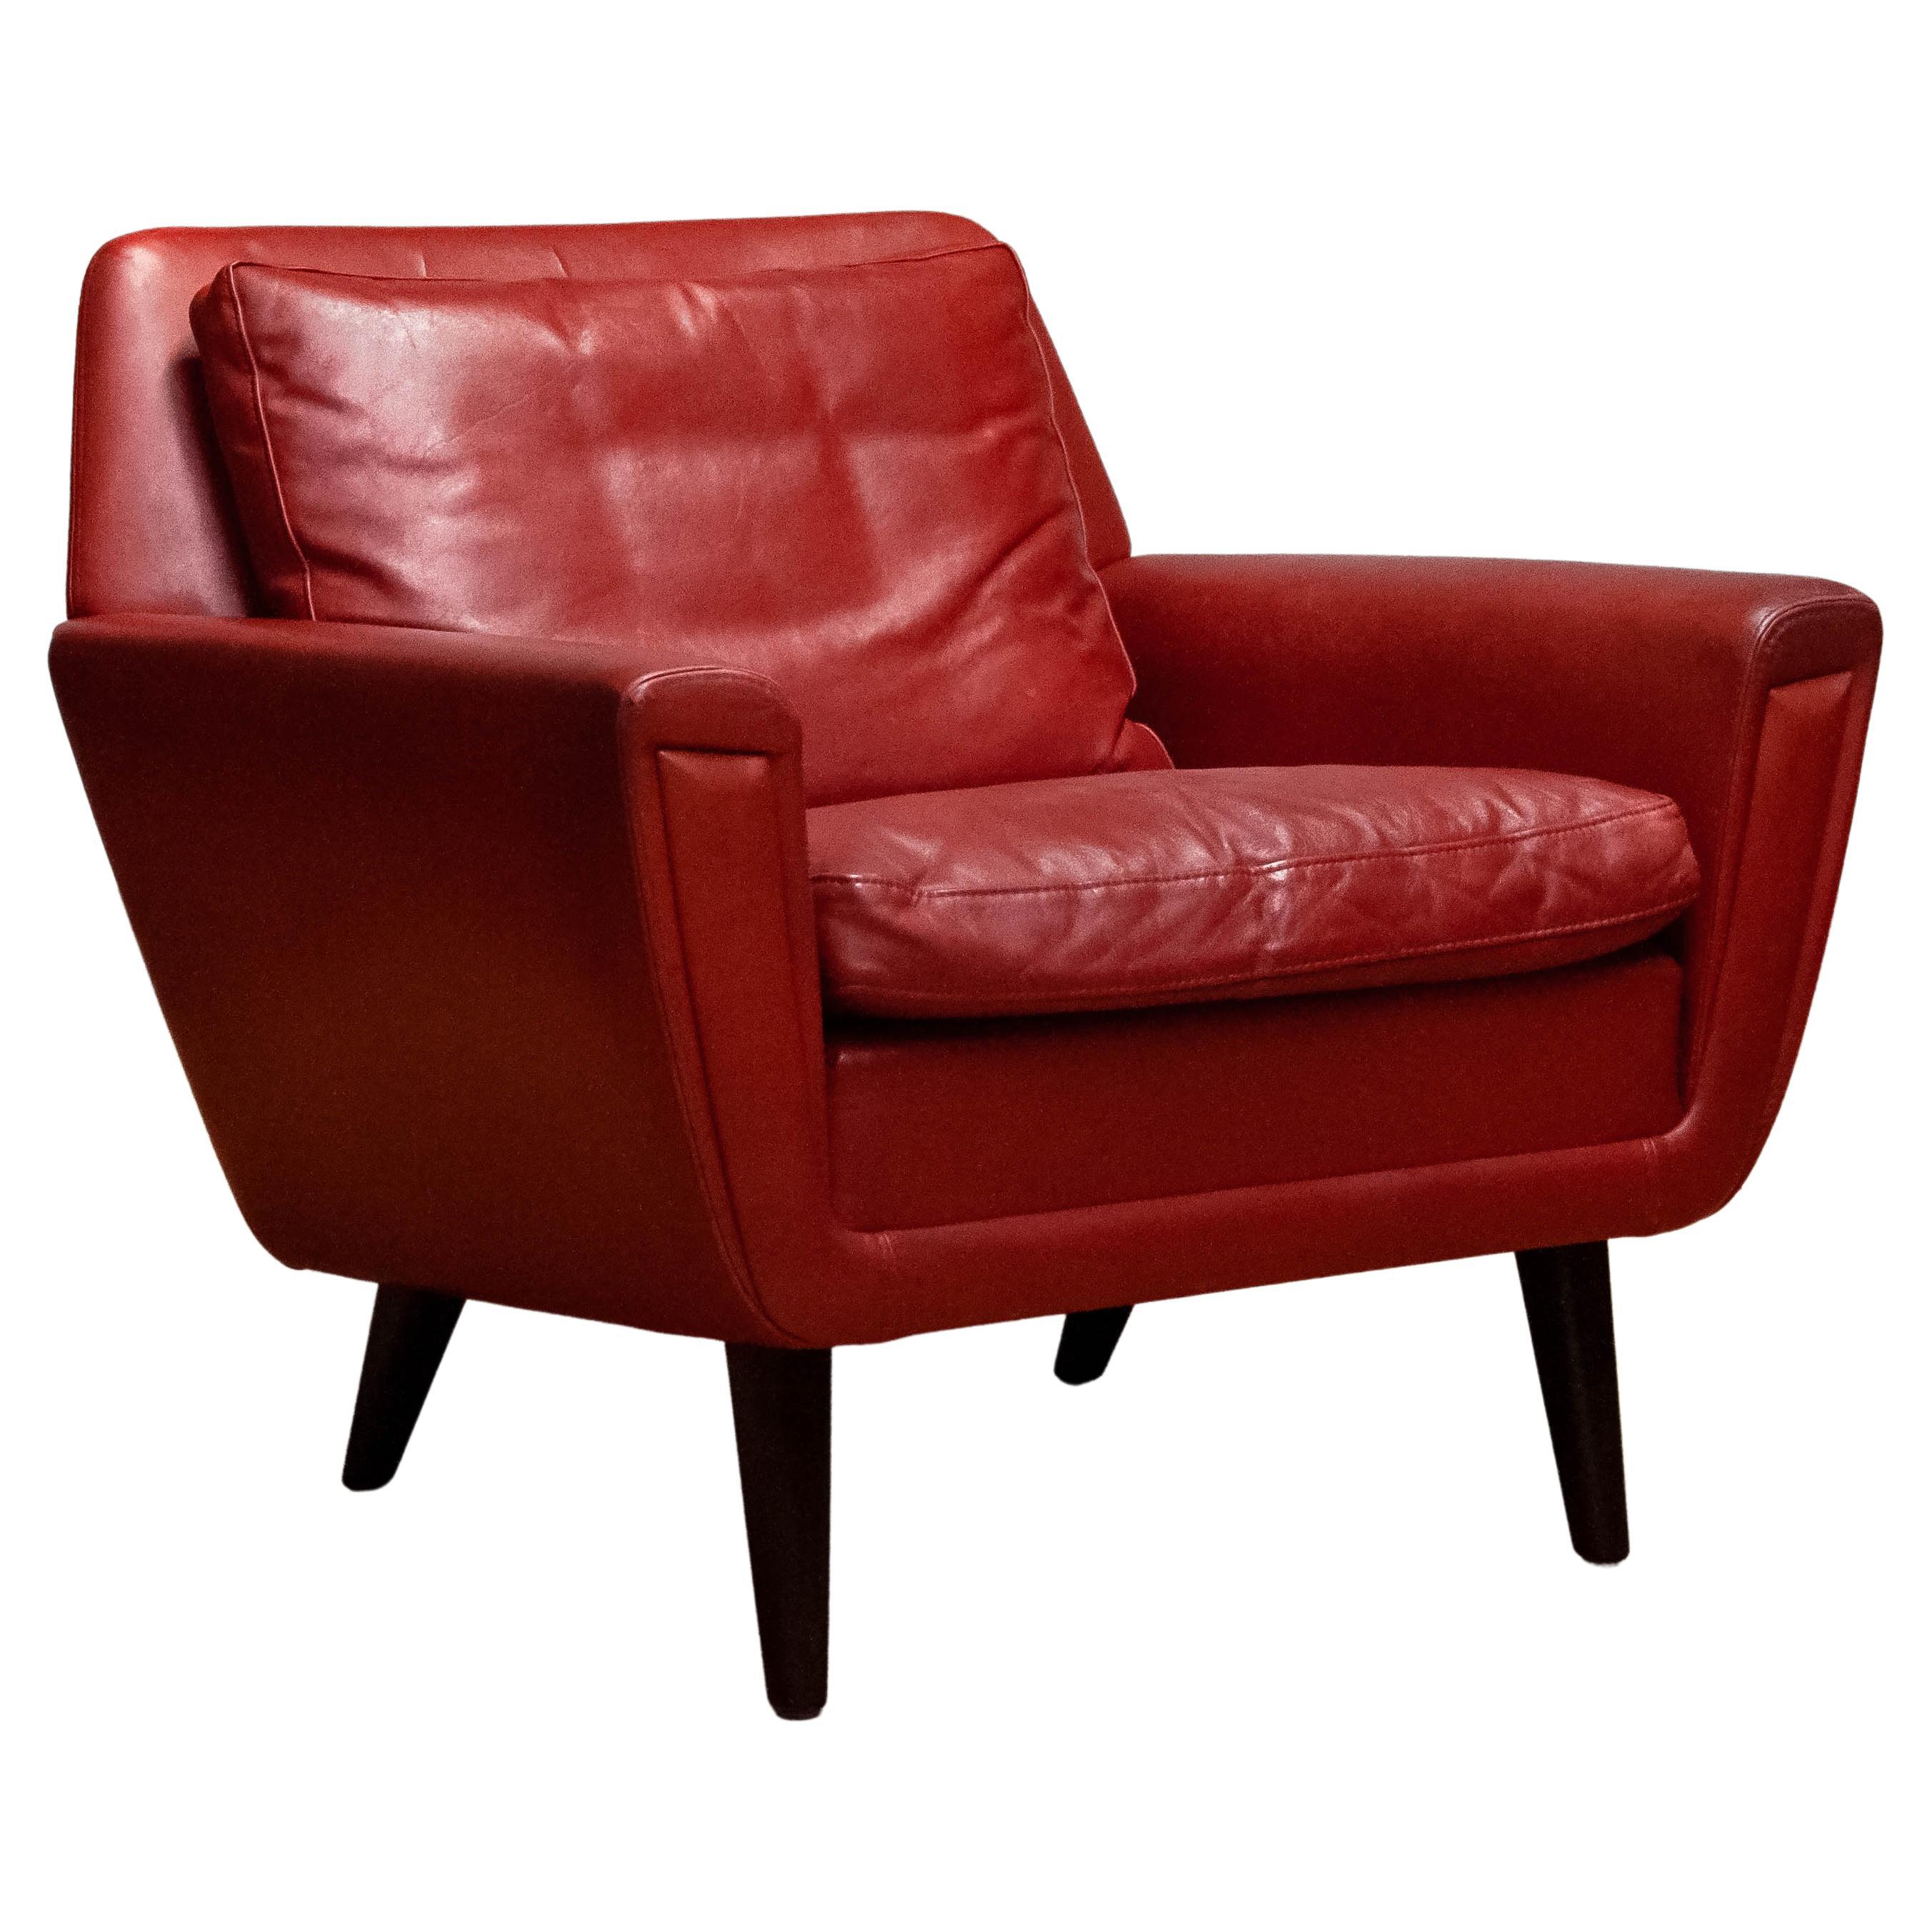 1960s Original Danish Lounge Easy Chair in Red Leather 